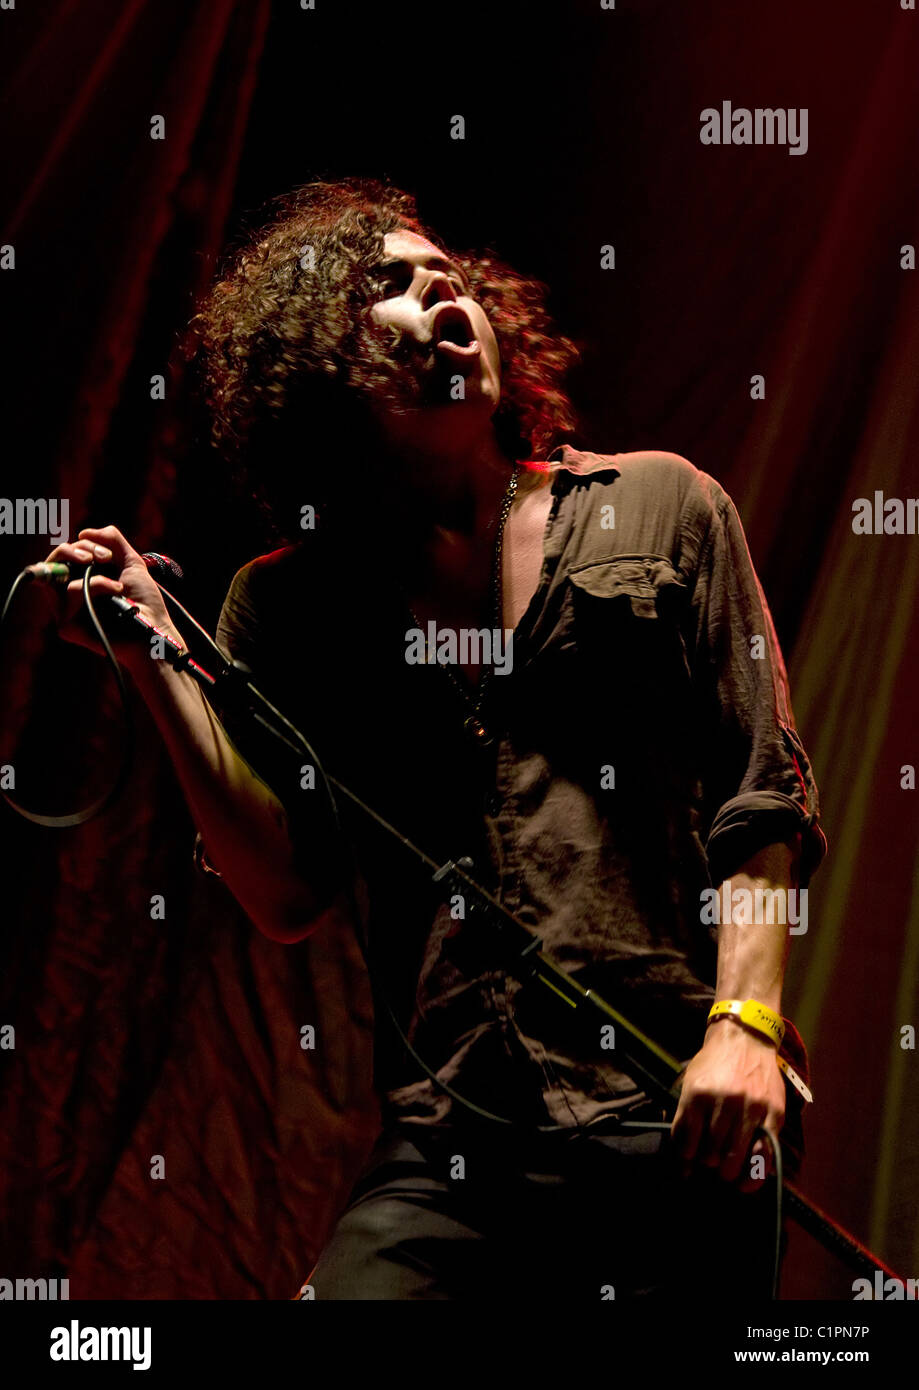 Alex Vargas of Vagabond support McFly at the Liverpool Echo Arena as Stock  Photo - Alamy